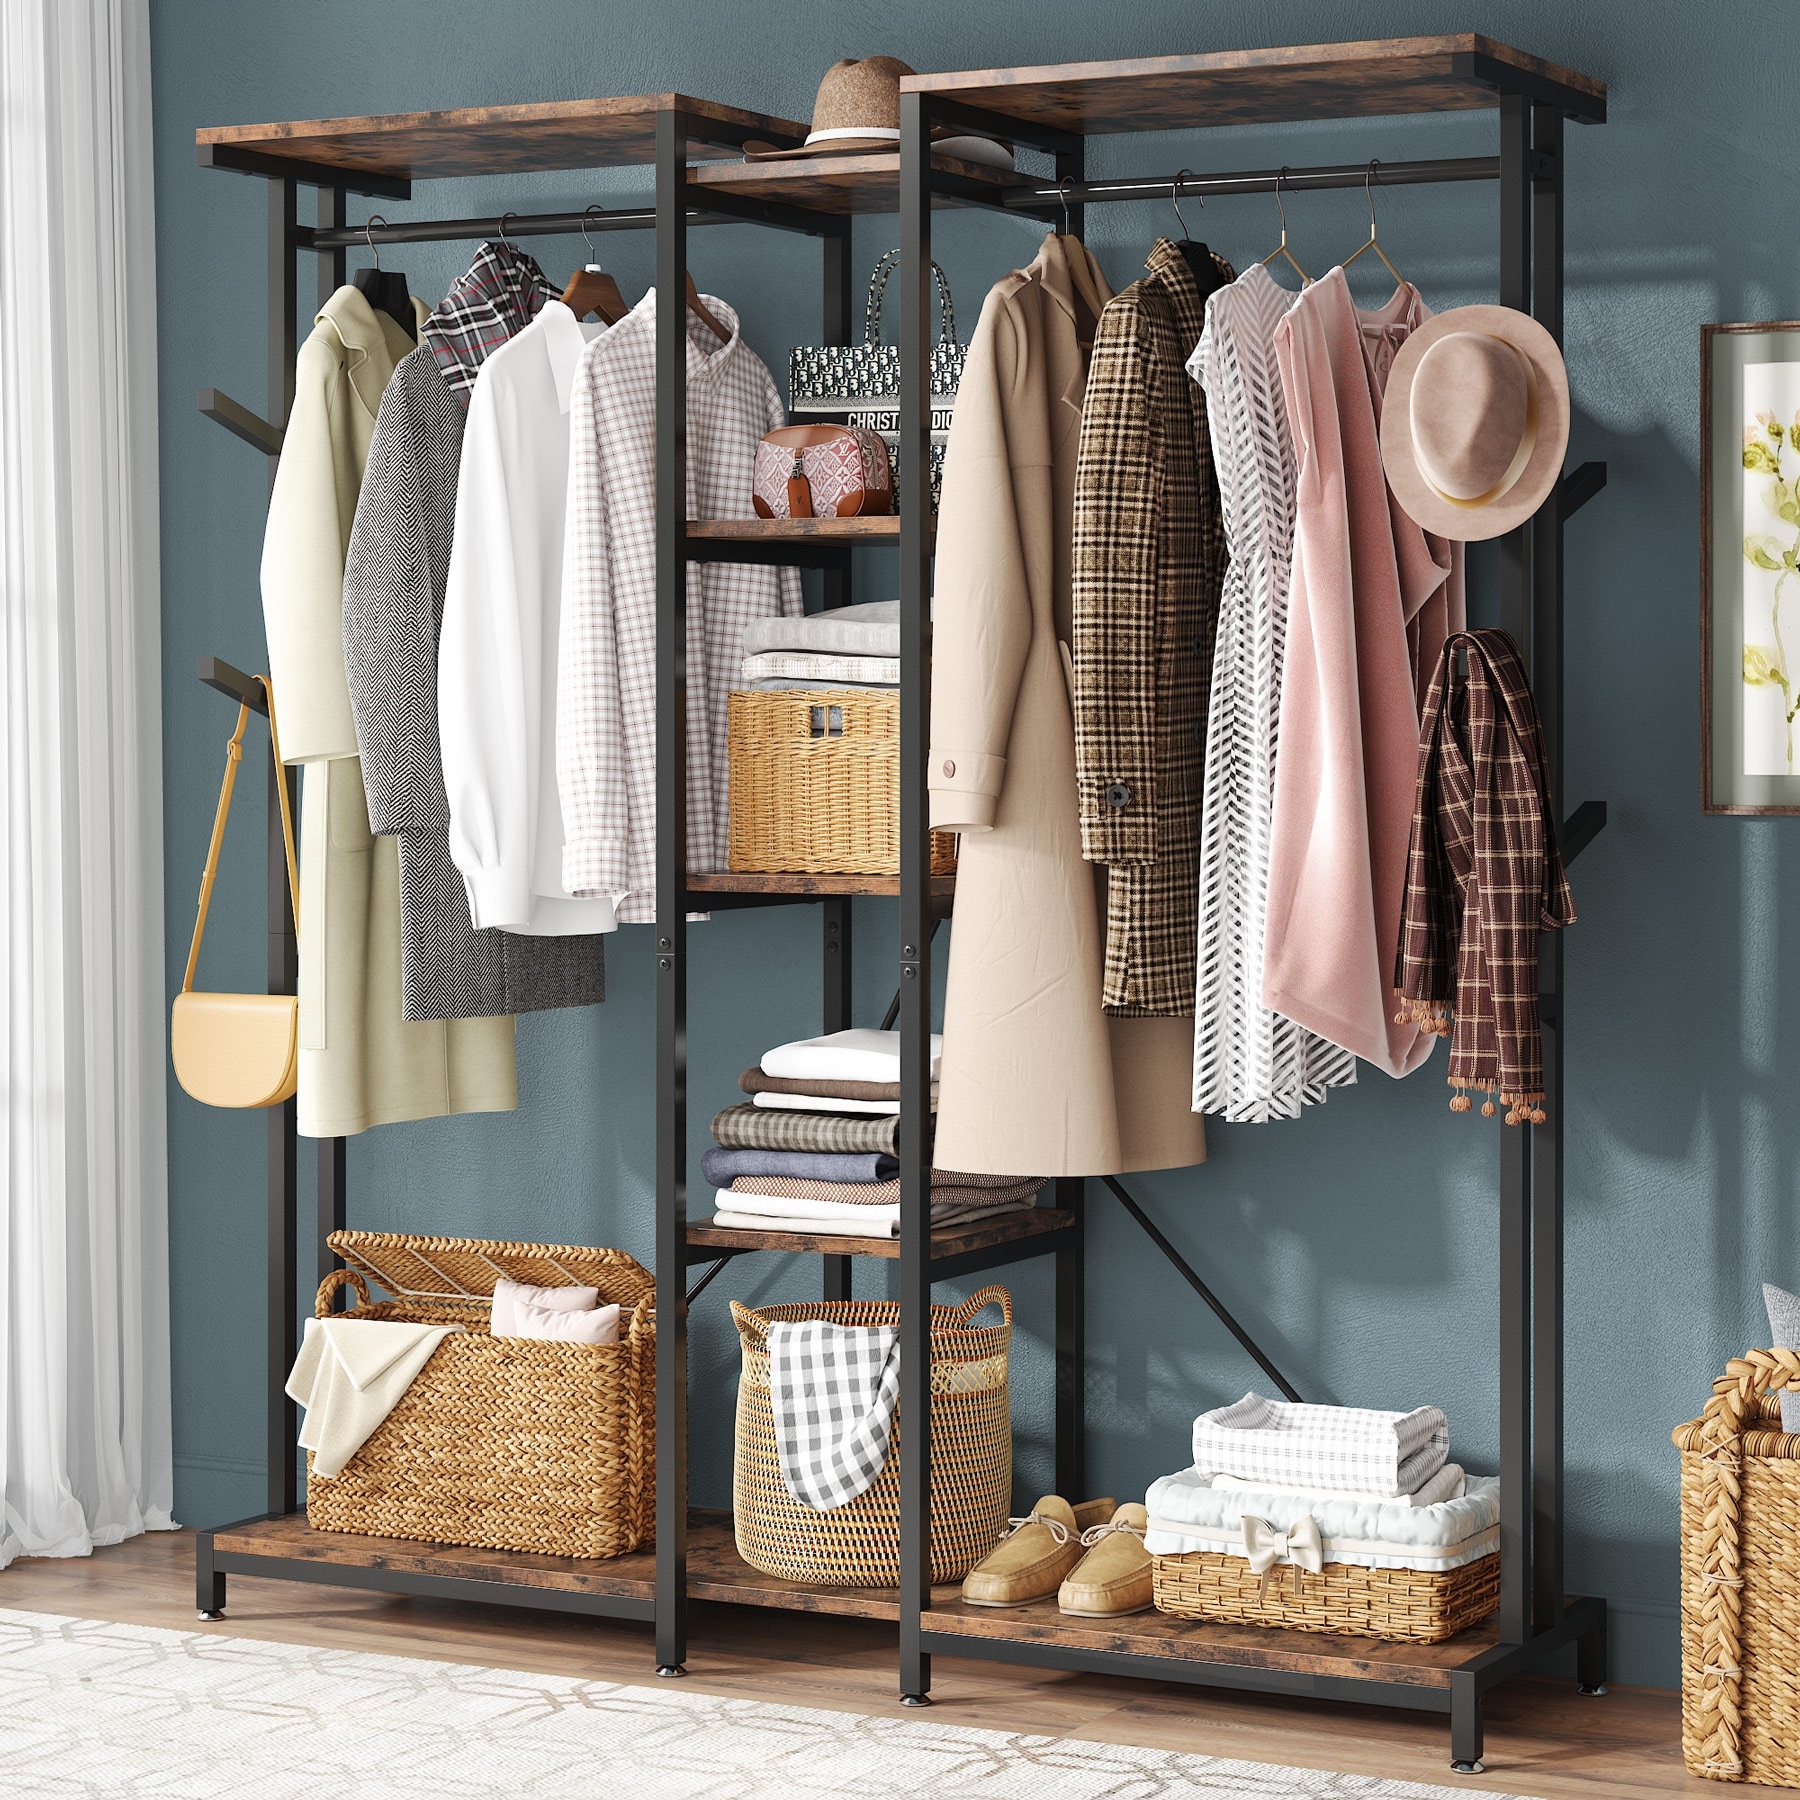 https://ak1.ostkcdn.com/images/products/is/images/direct/5d4e03a57c84f3ee432fc6d55d22fde22593a119/Extra-Large-Closet-Organizer-with-Hooks%2C-Heavy-Duty-Closet-Clothes-Rack-with-Shelves-and-Hanging-Rod.jpg